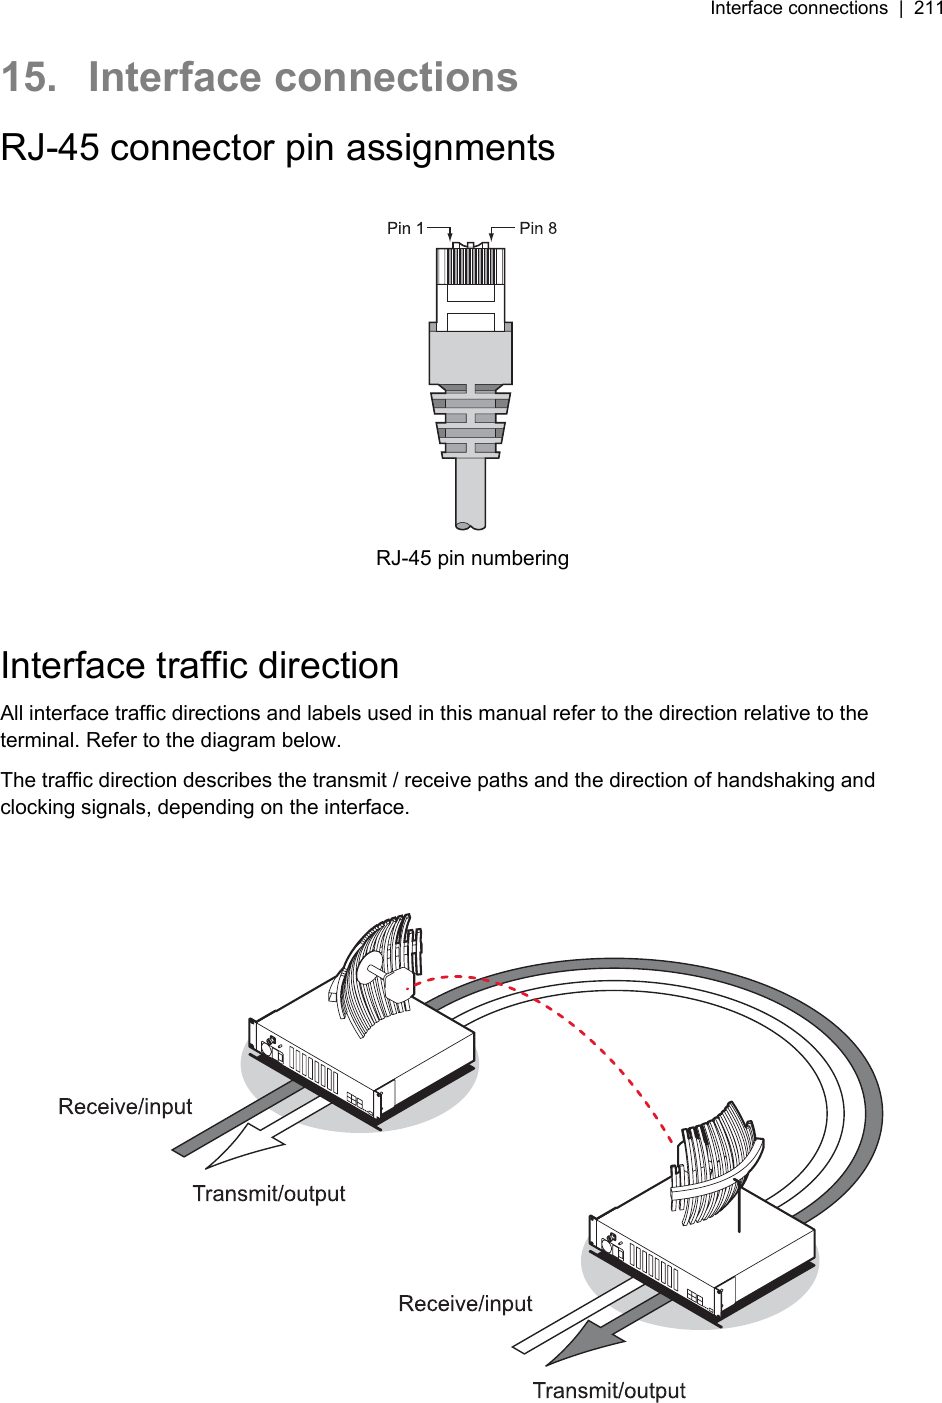 Interface connections  |  211   15. Interface connections RJ-45 connector pin assignments   RJ-45 pin numbering   Interface traffic direction All interface traffic directions and labels used in this manual refer to the direction relative to the terminal. Refer to the diagram below. The traffic direction describes the transmit / receive paths and the direction of handshaking and clocking signals, depending on the interface.     